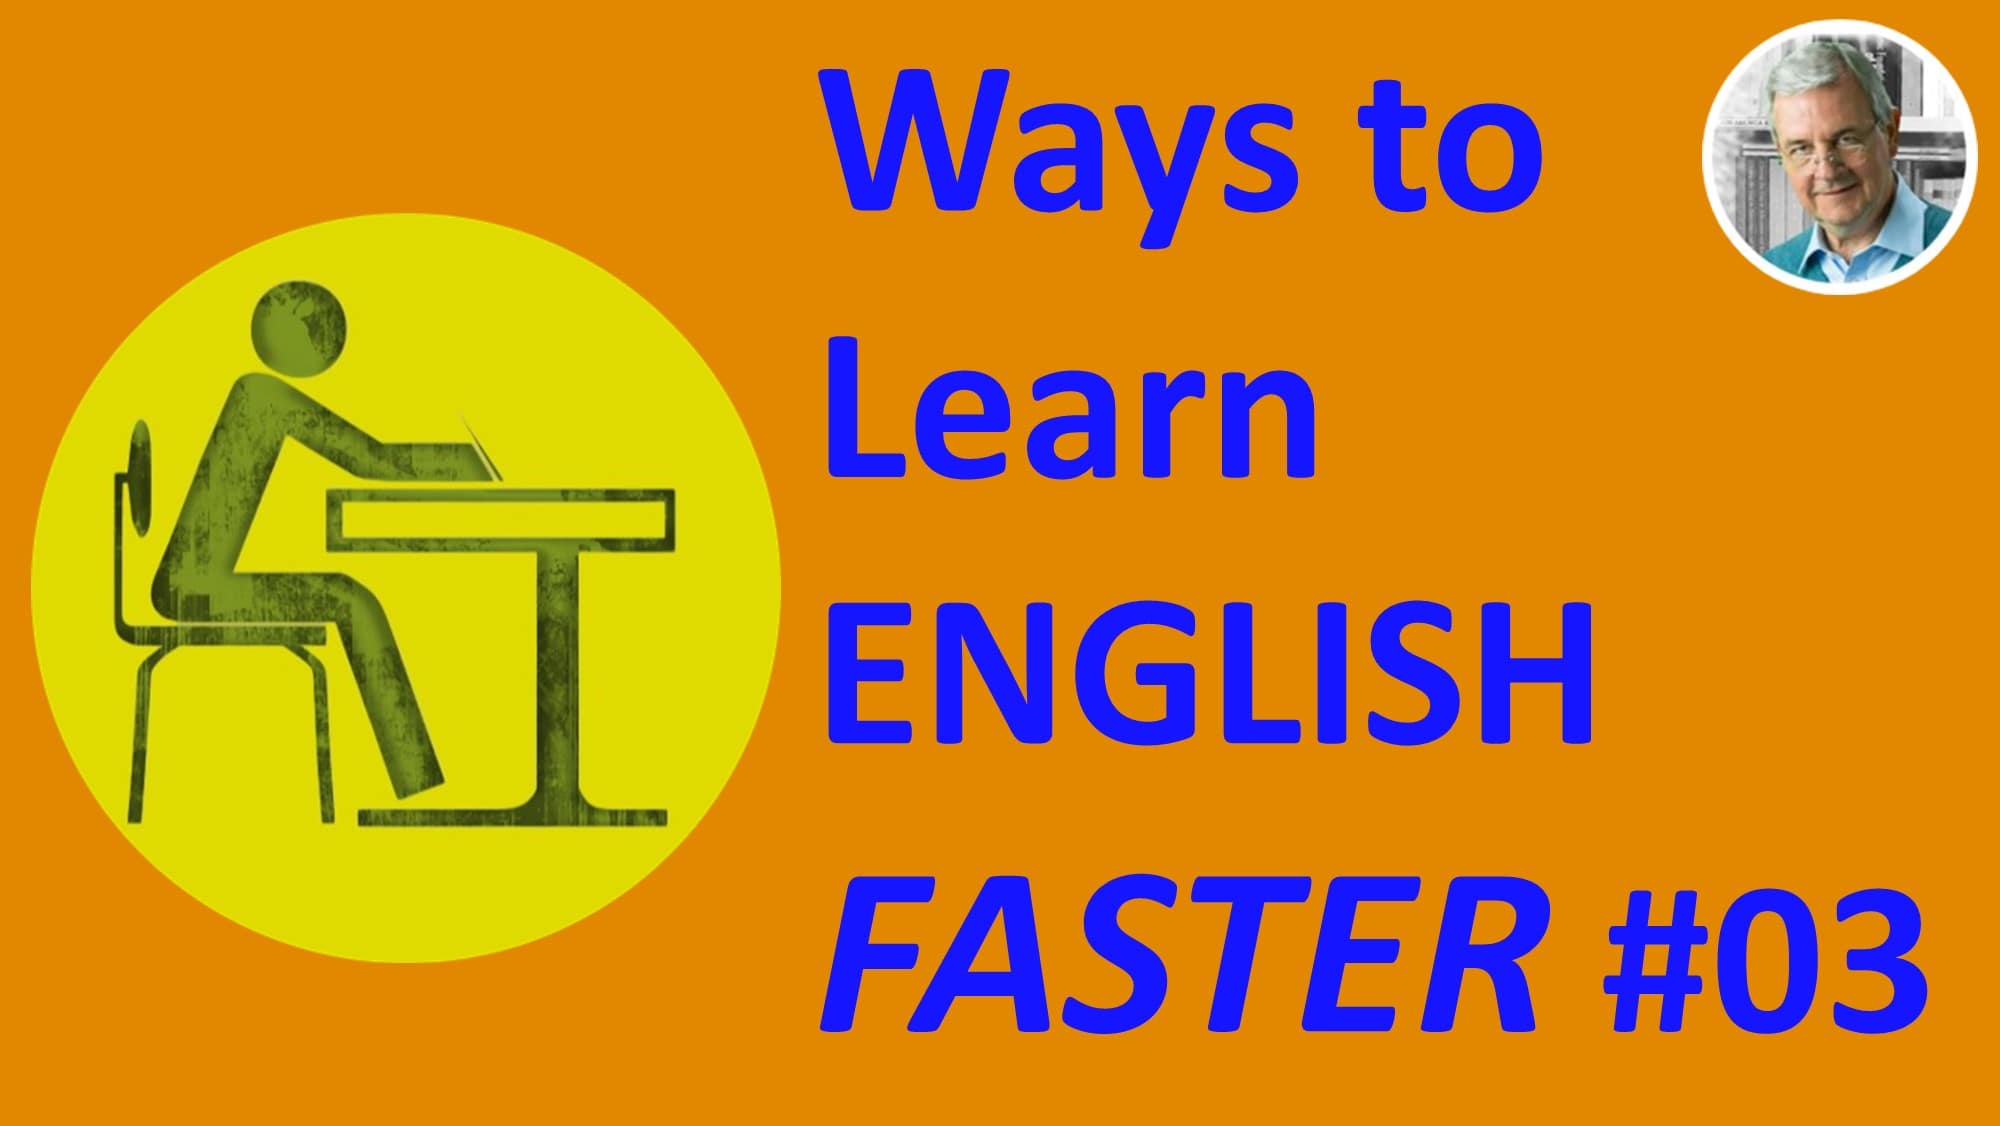 how to learn English faster - tip 03